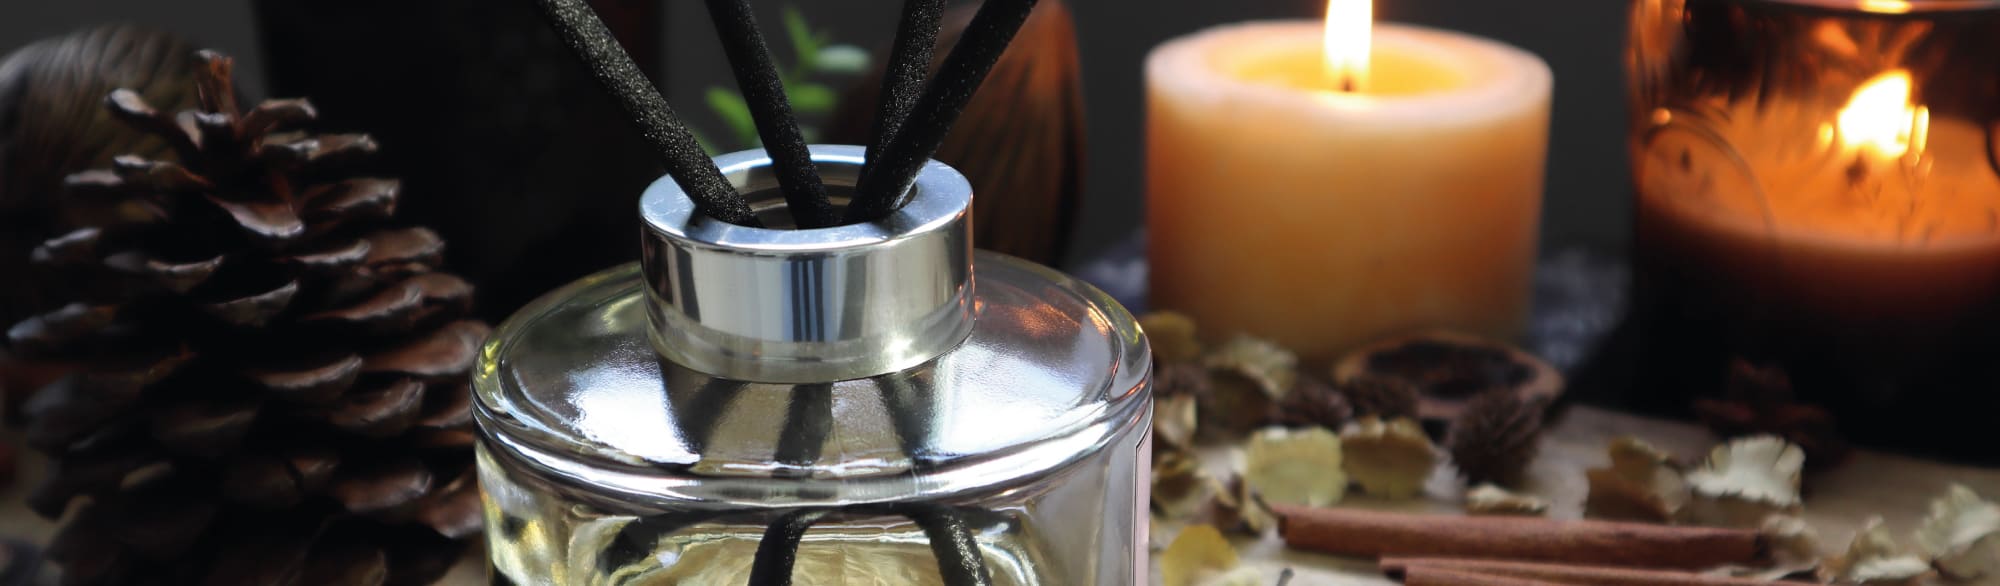 Melt Reed Diffusers